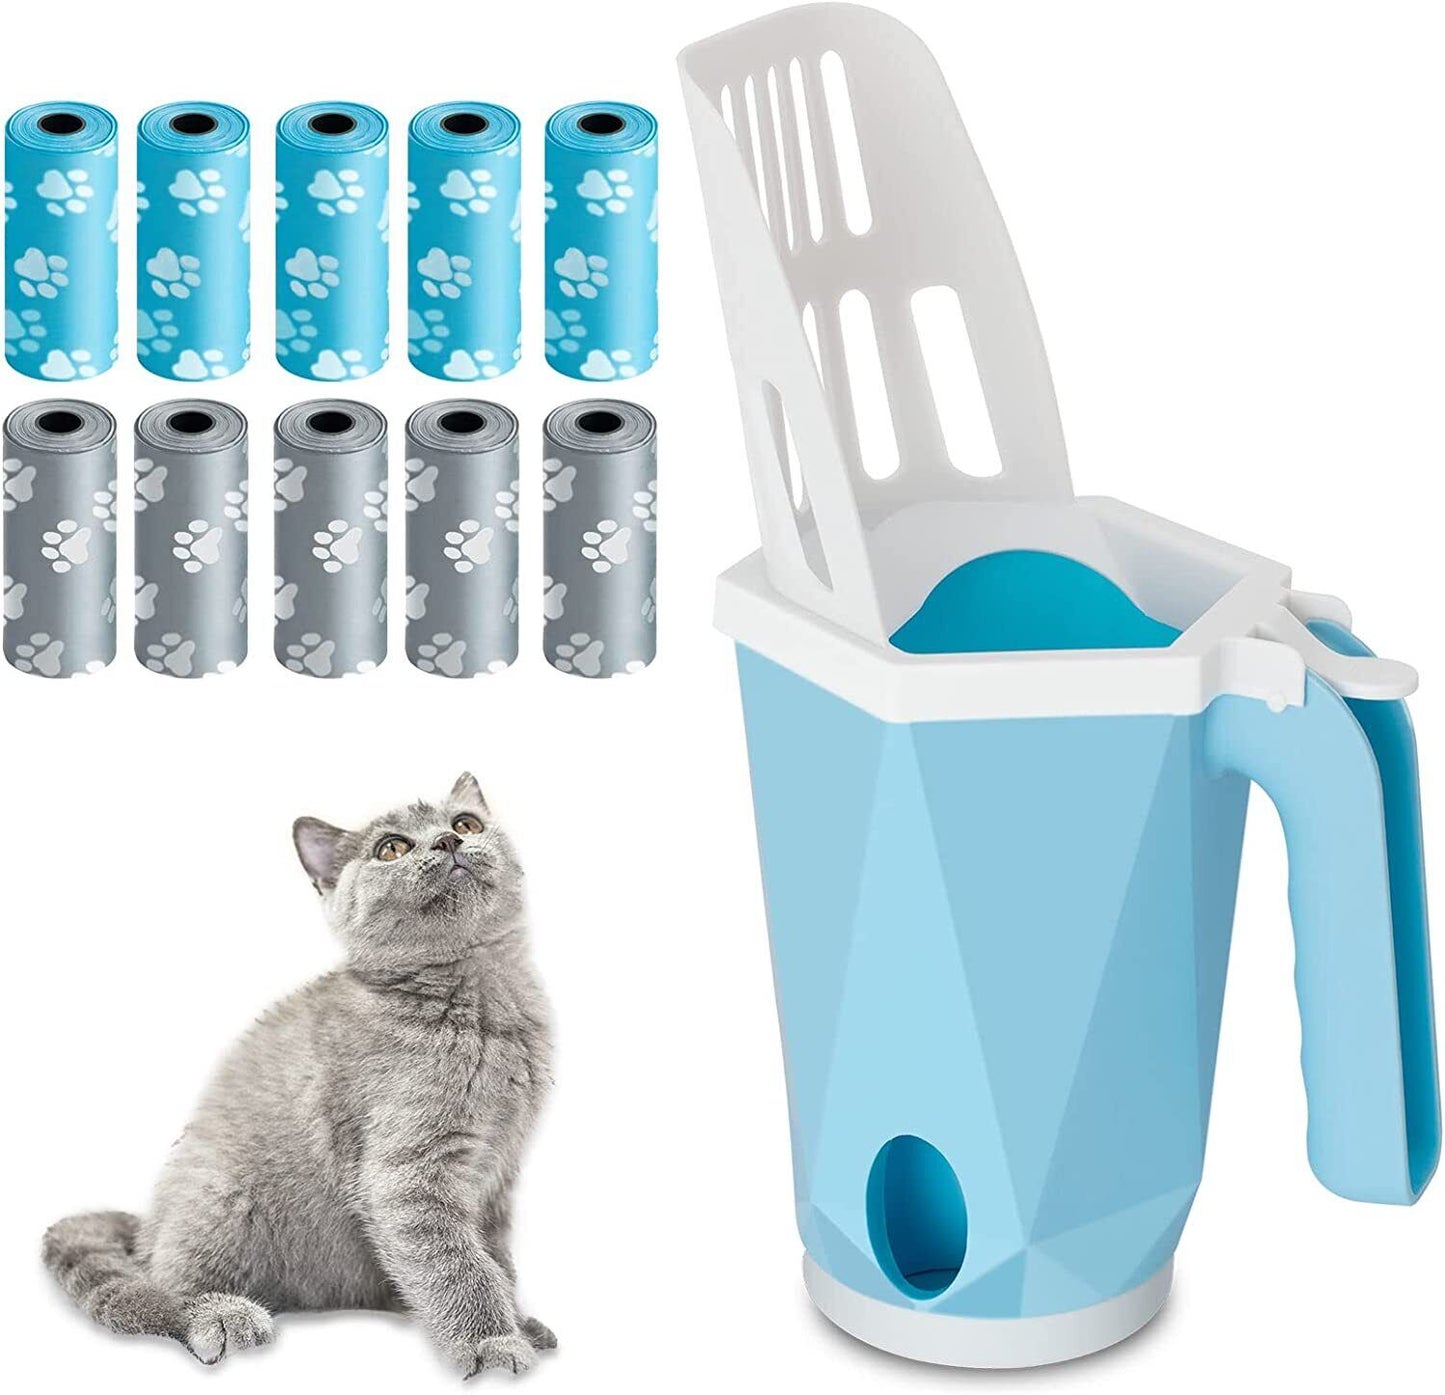 Cat Litter Scoop Scooper Box Removable Deep Shovel Large Capacity Waste NEW